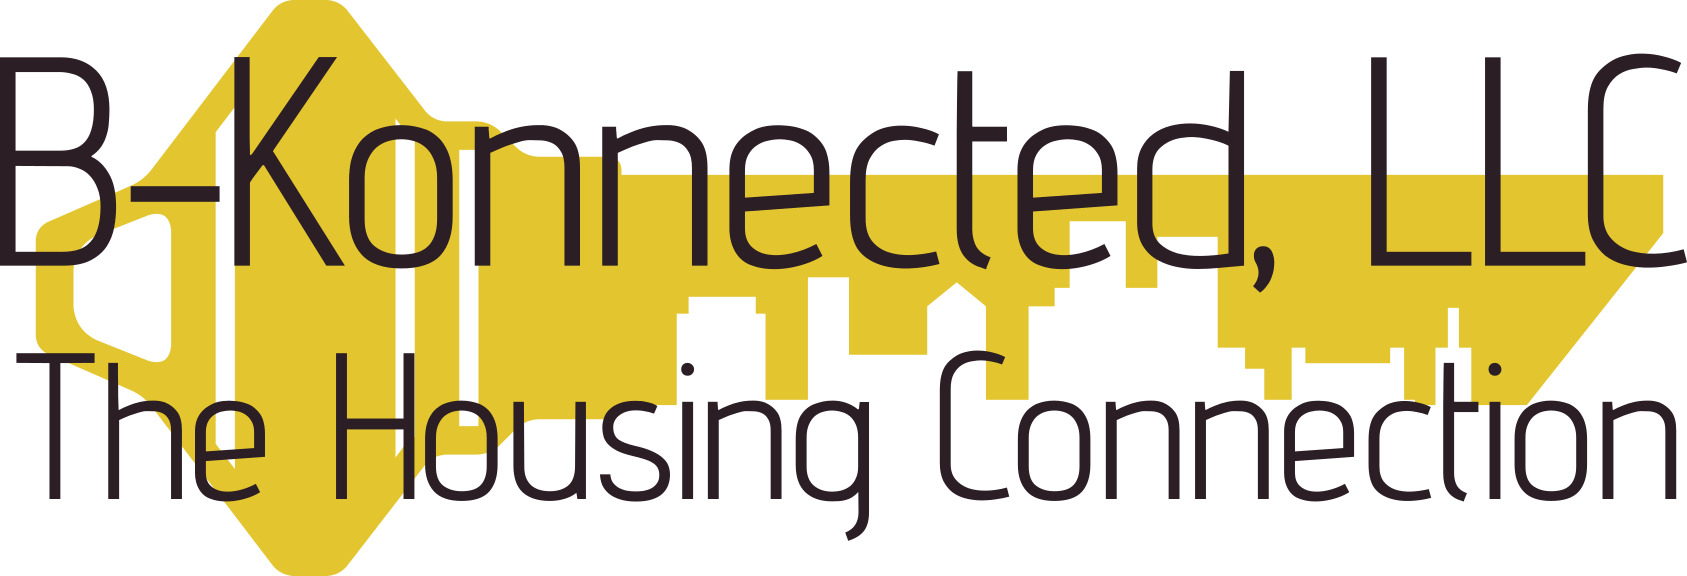 B Connected Logo